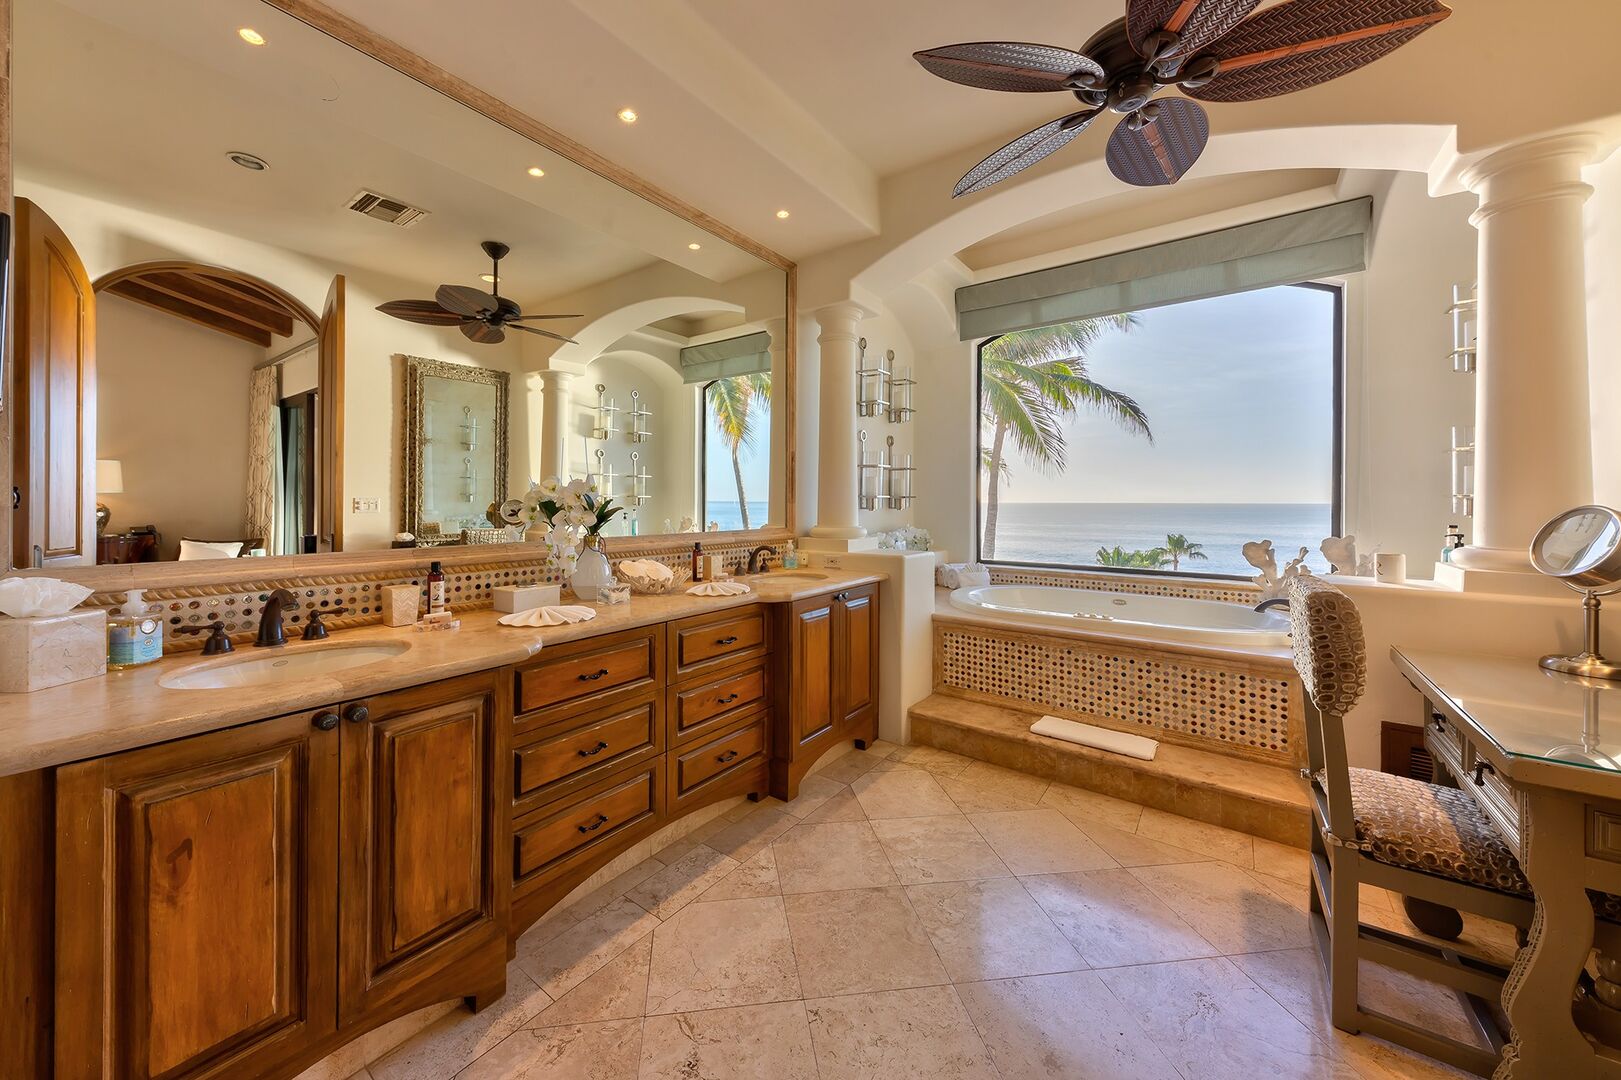 The large double vanity of the master bedroom with a view of the ocean from the window.